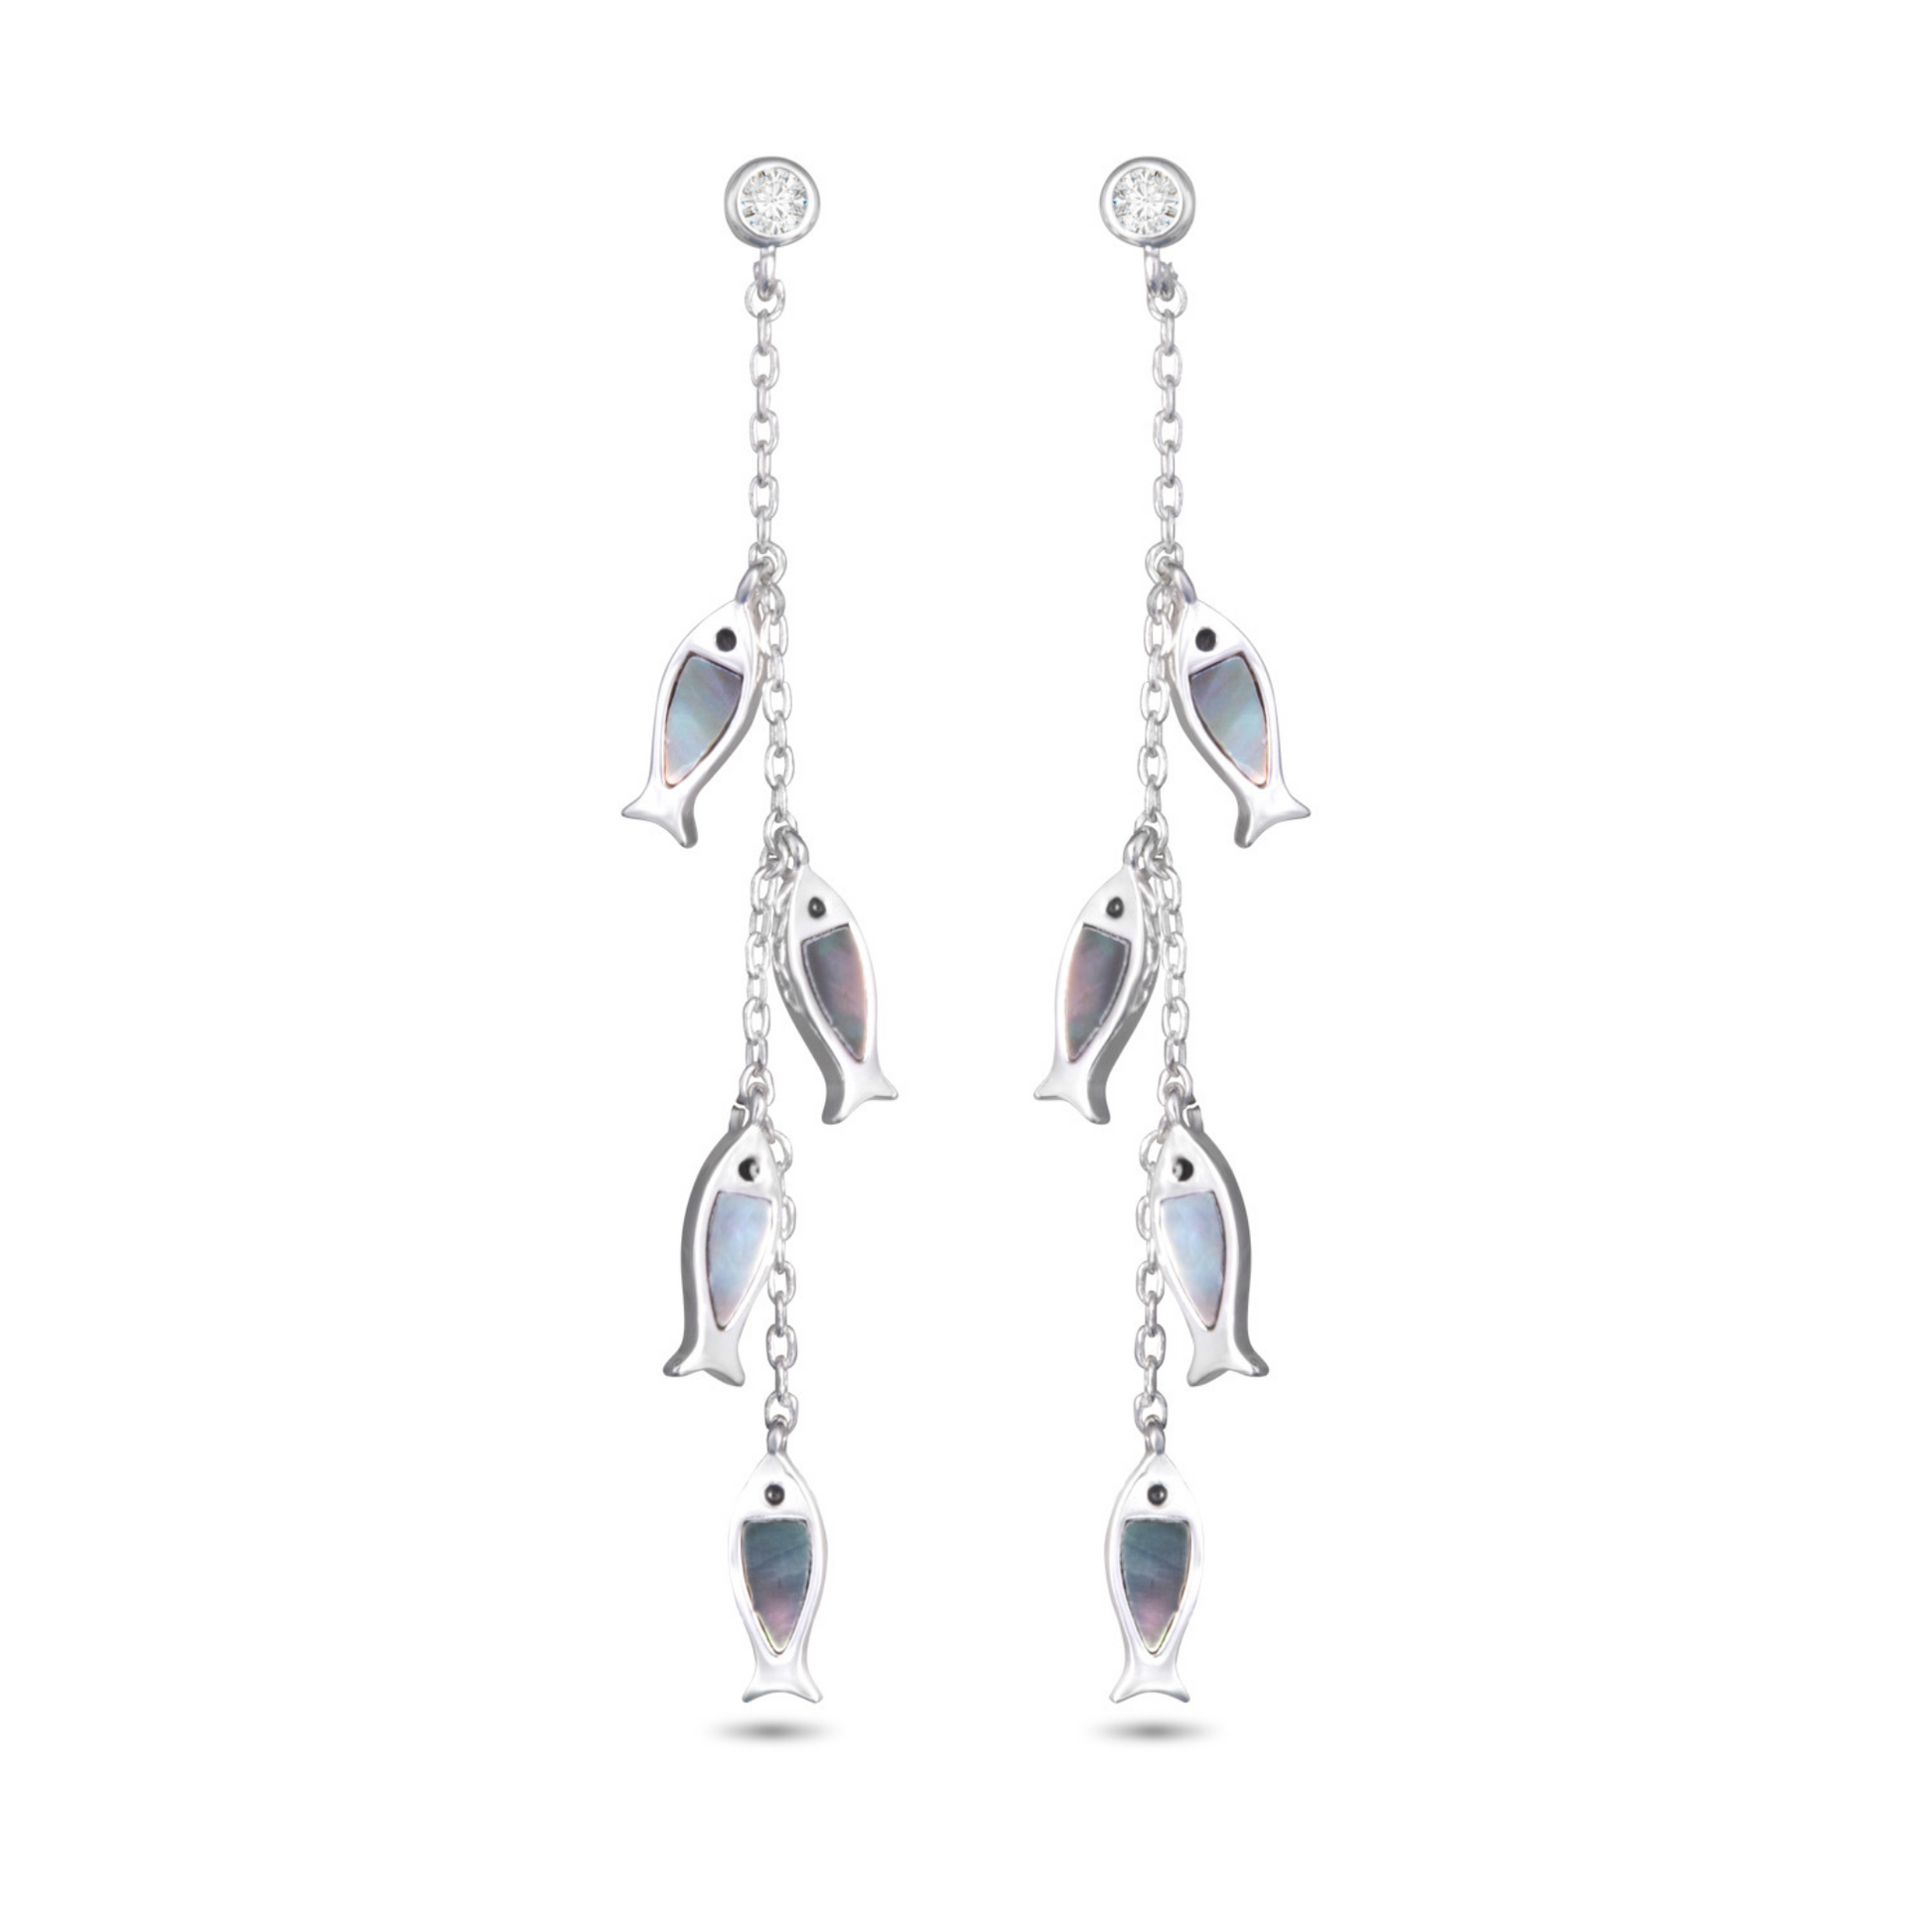 These elegant Four Fish Chain Drop Earrings feature mother of pearl accents and a sleek grey color scheme, making them a sophisticated addition to any outfit. The unique fish design adds a touch of whimsy, while the drop style elongates the neck and adds a flattering effect. Perfect for both formal and casual occasions.